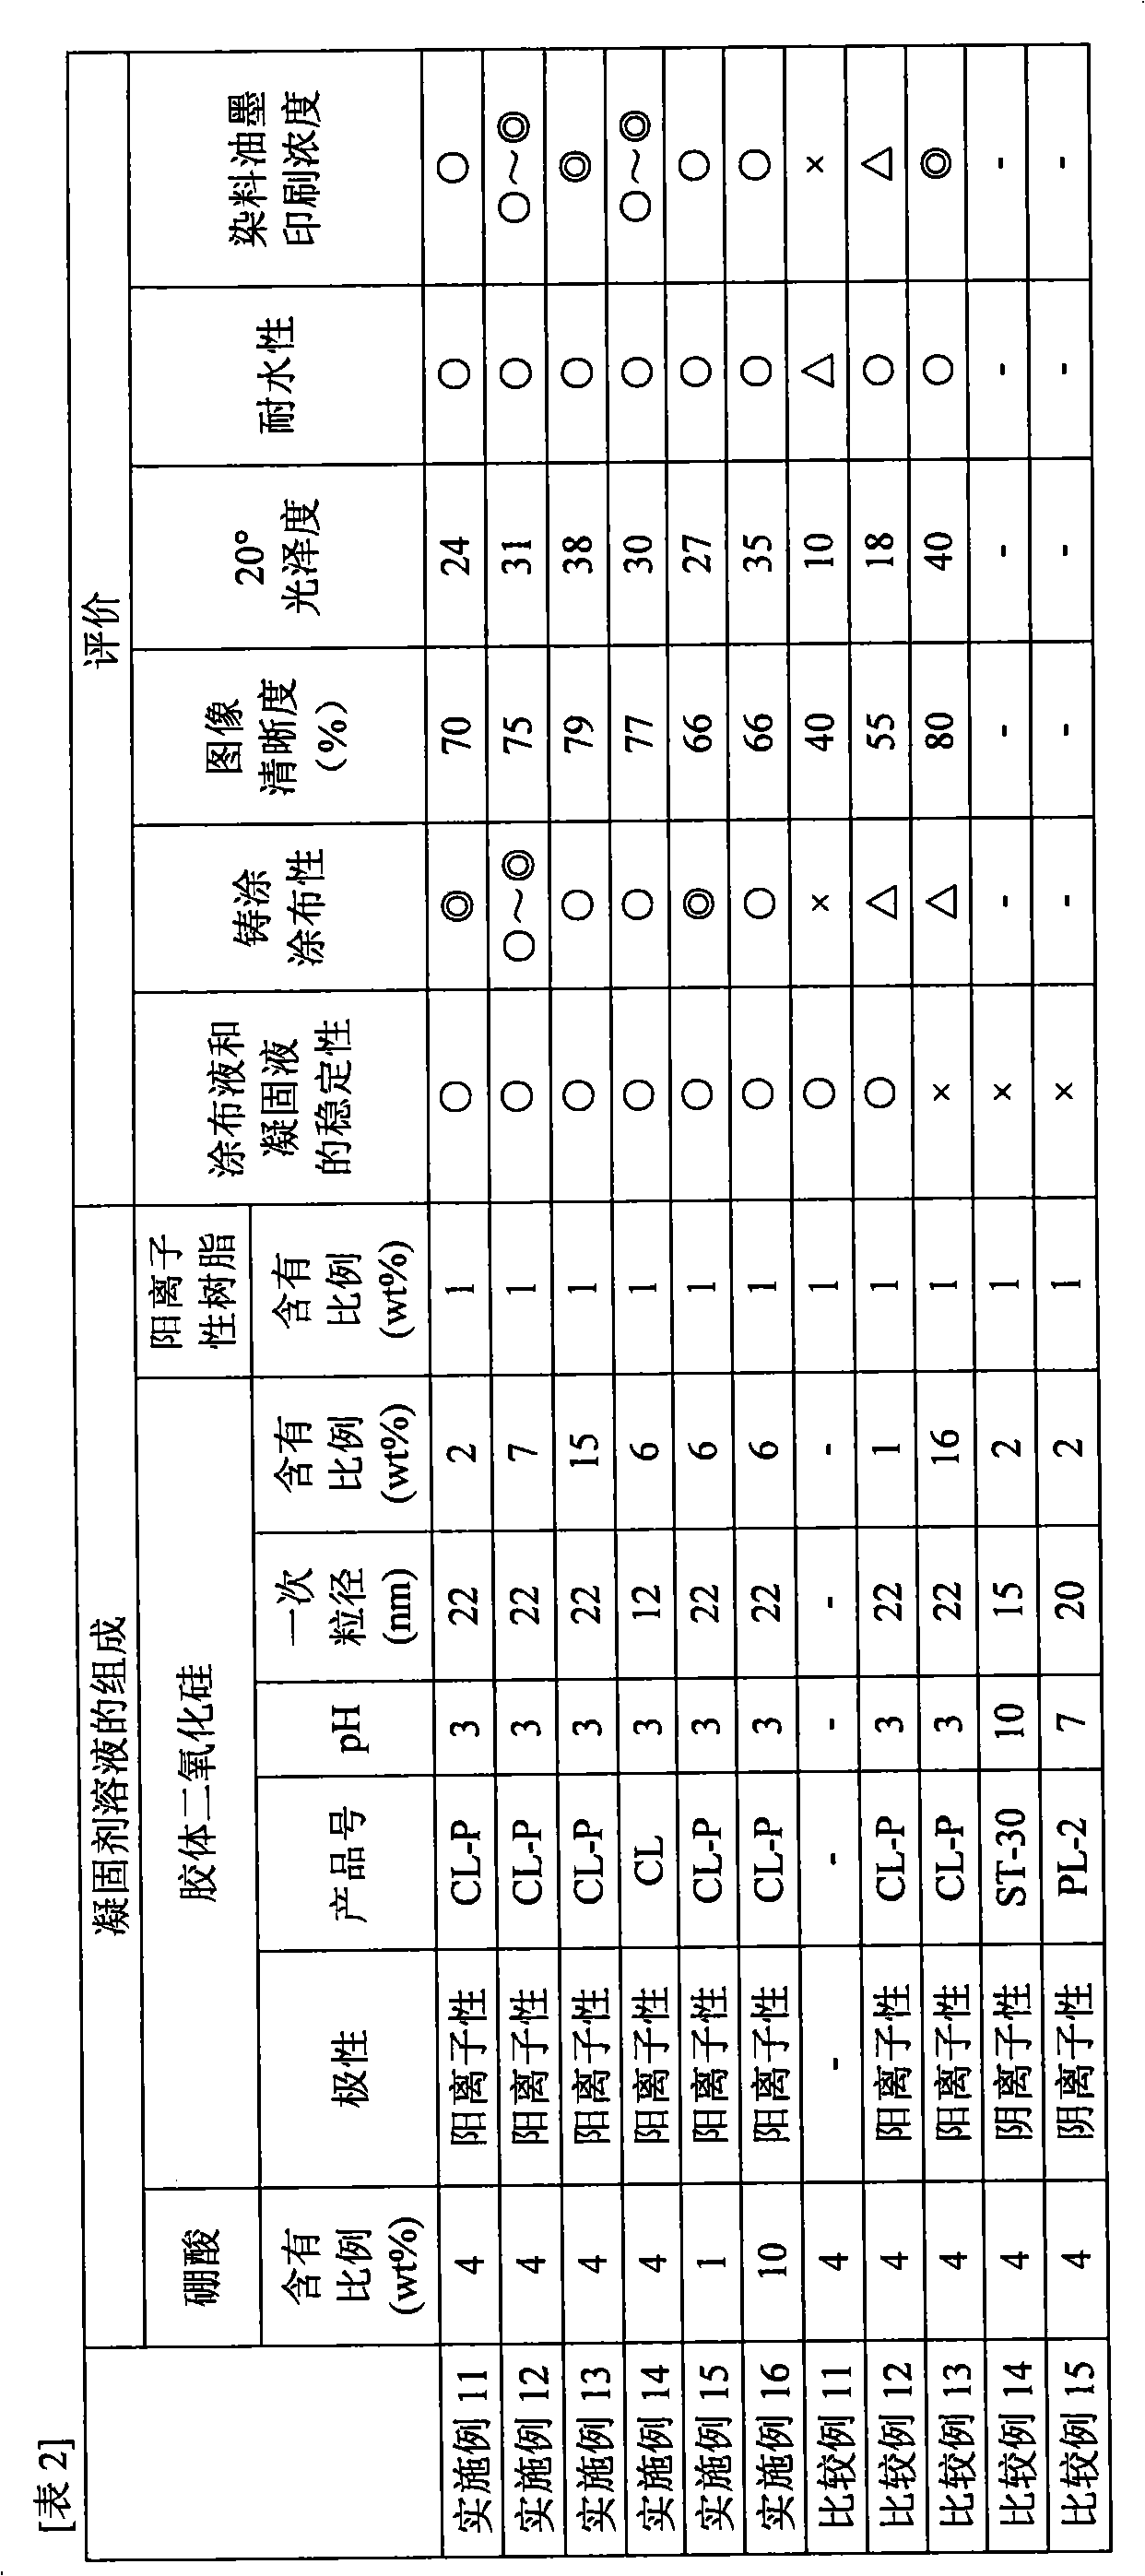 Ink jet recording medium and process for producing the ink jet recording medium